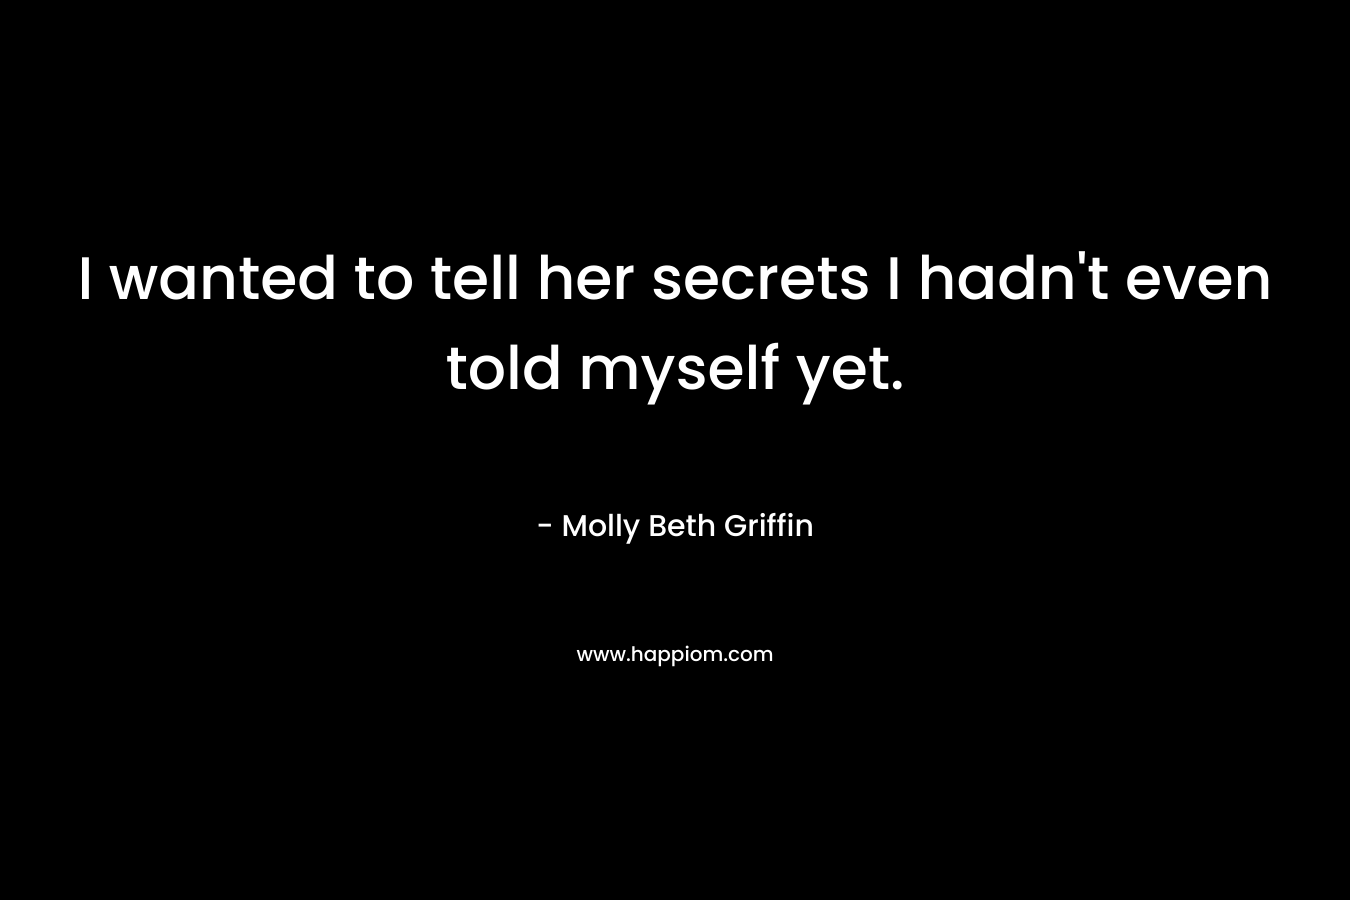 I wanted to tell her secrets I hadn't even told myself yet.